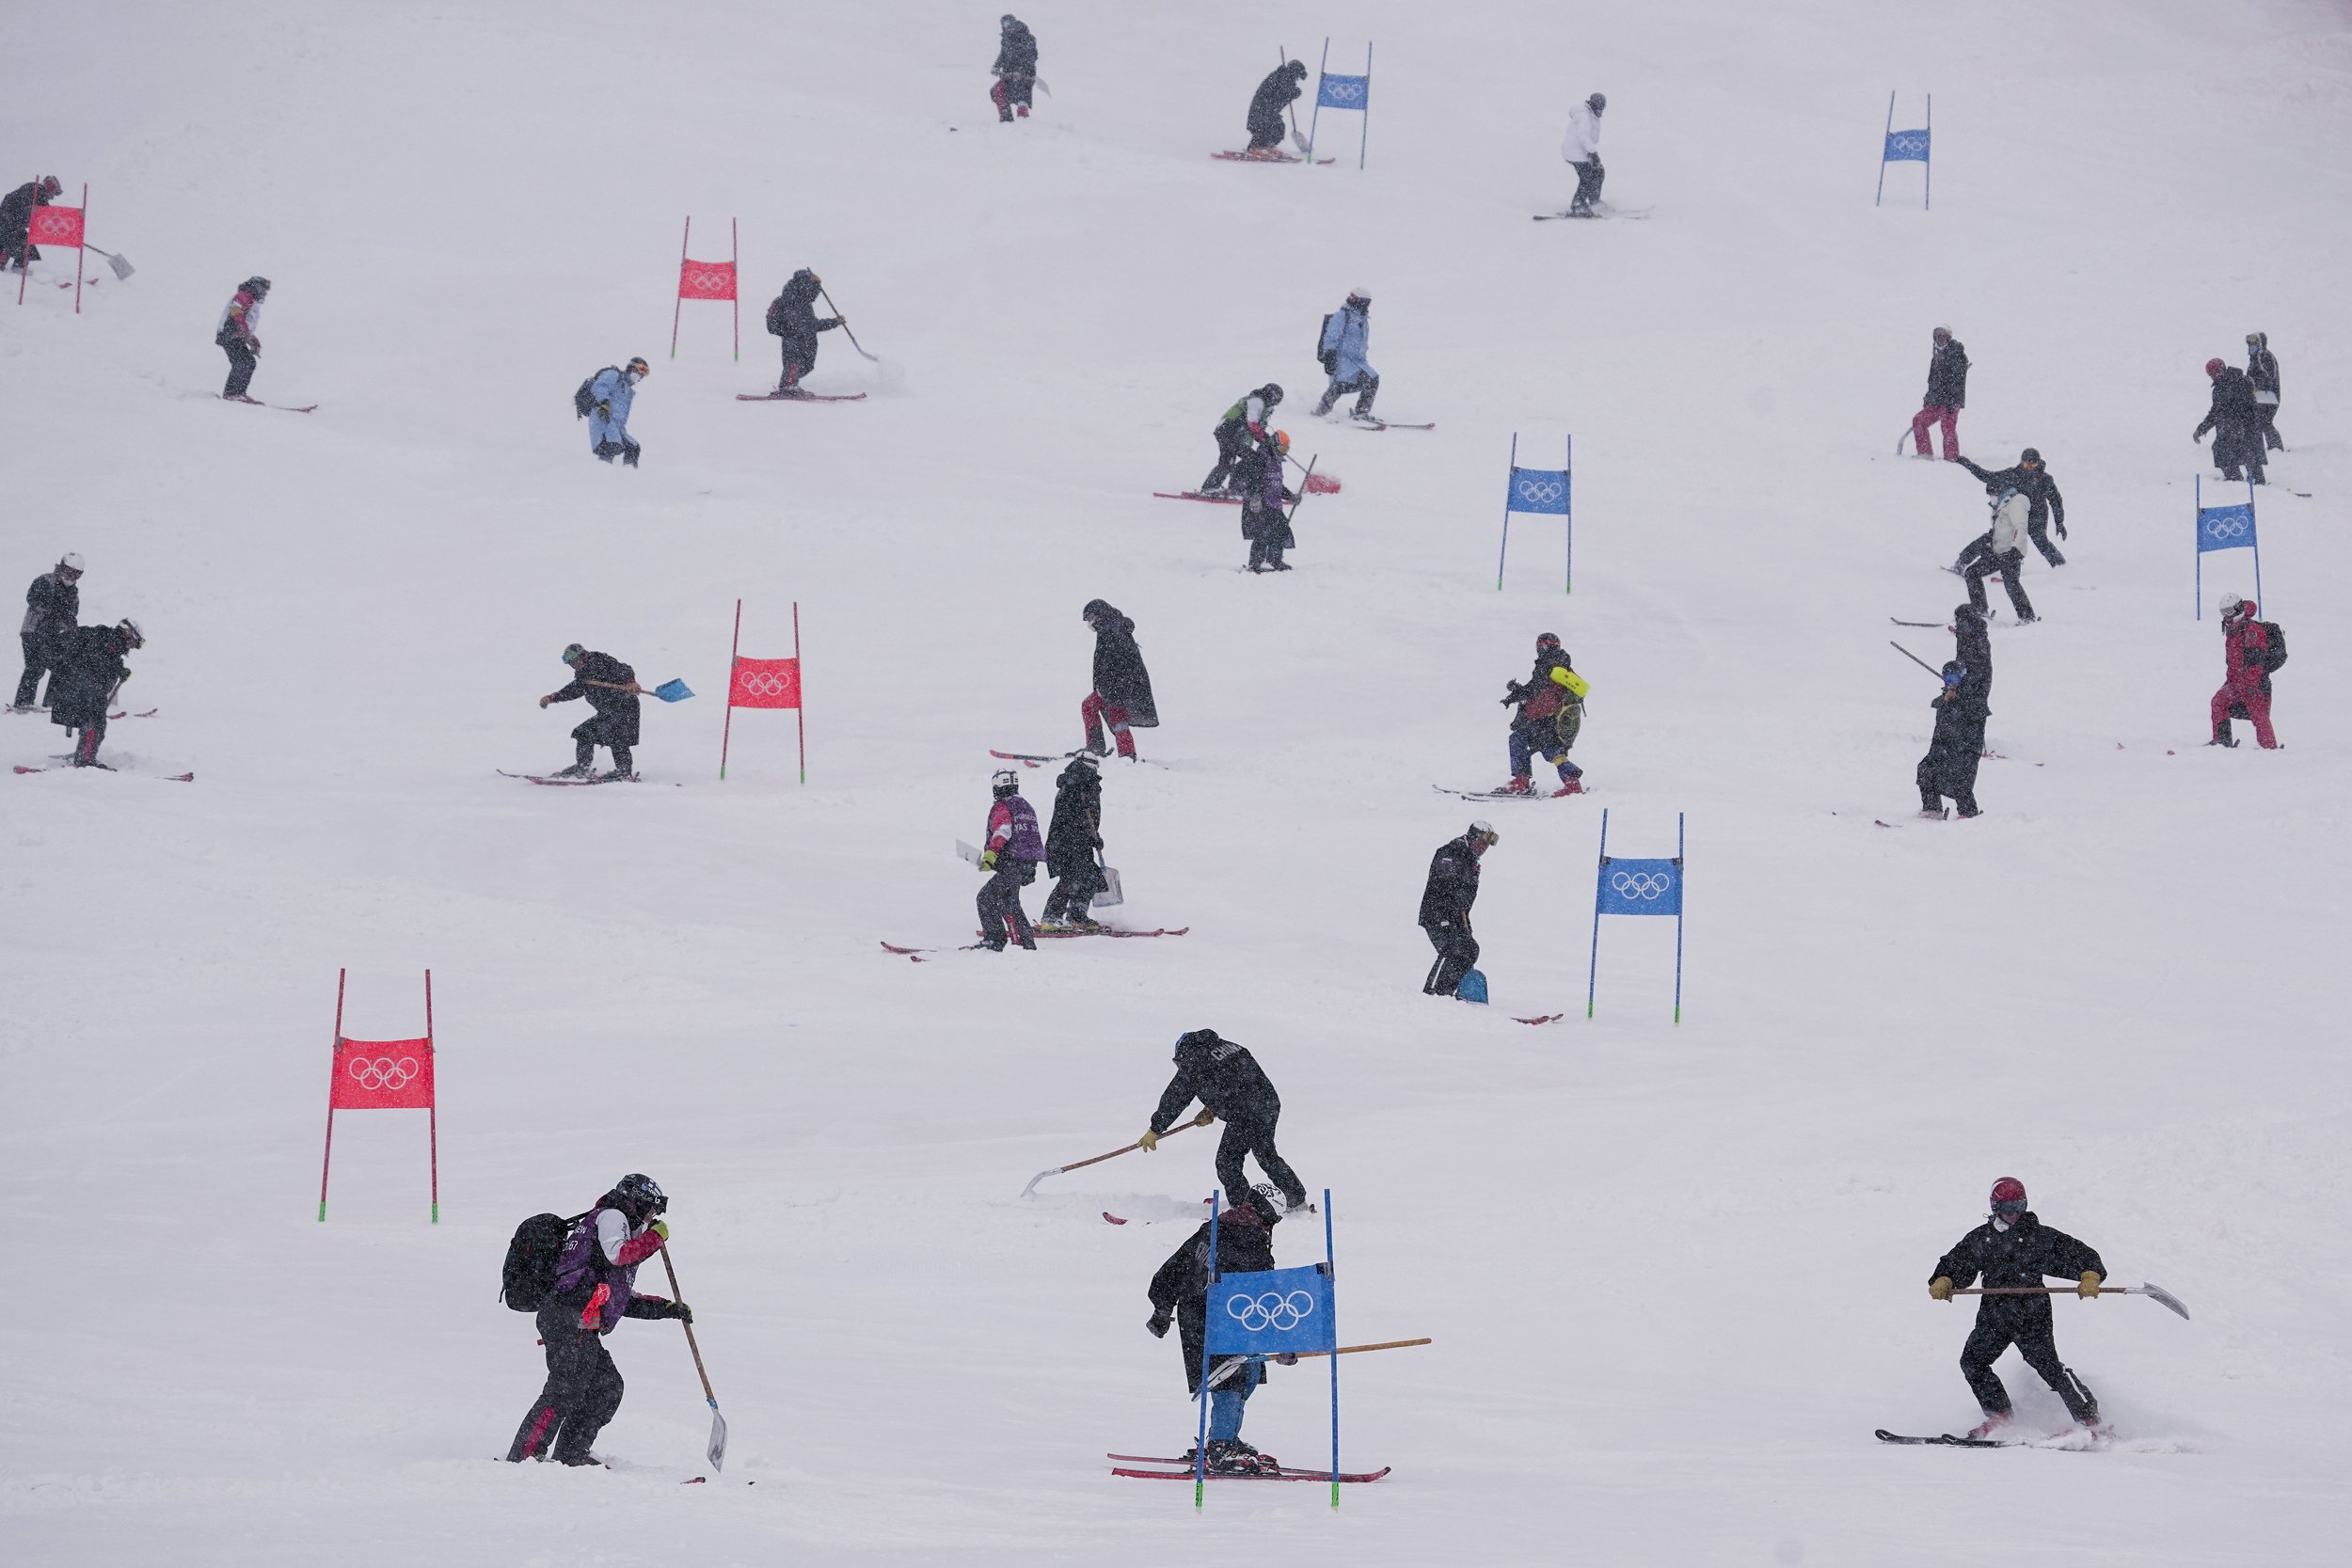  Workers clear snow from the course after the second run of the men's giant slalom was delayed due to a heavy snowfall at the 2022 Winter Olympics, Sunday, Feb. 13, 2022, in the Yanqing district of Beijing. (AP Photo/Robert F. Bukaty) 